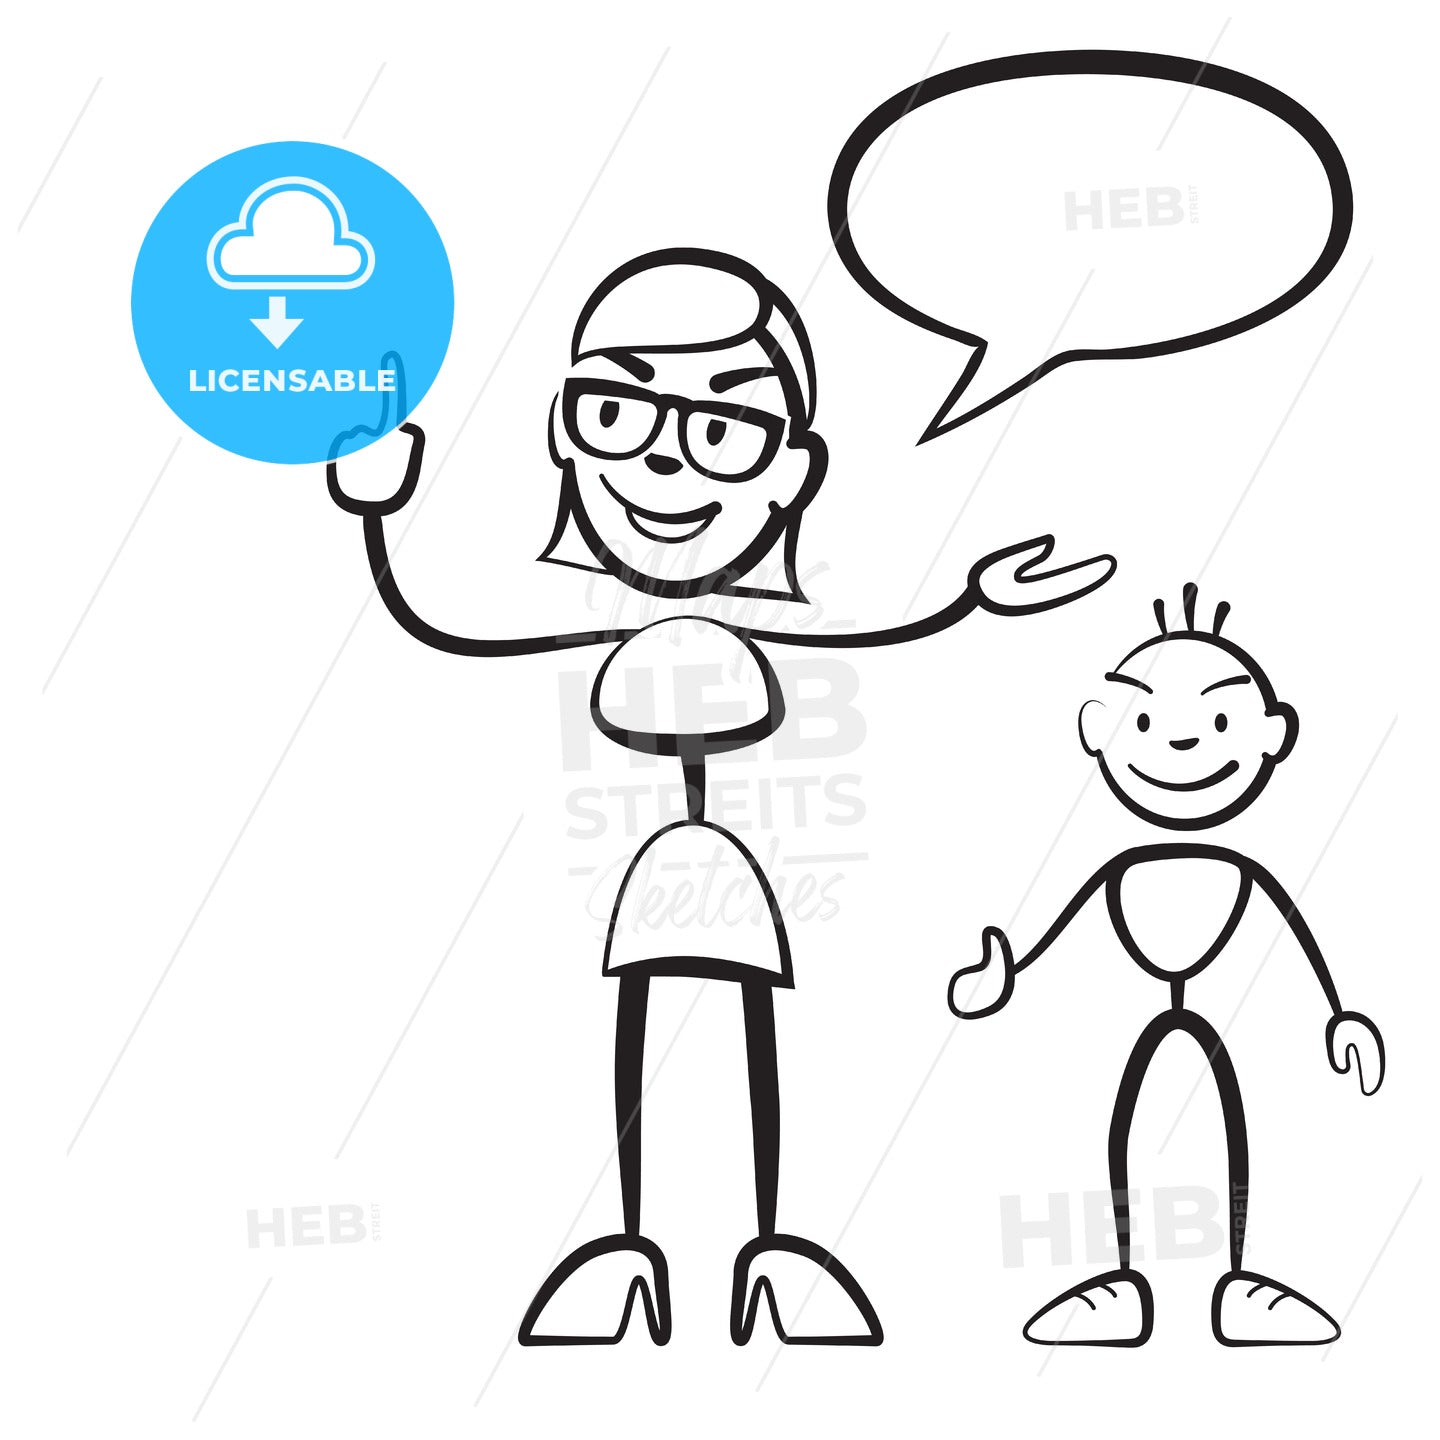 Stick figure persona woman with child and speech bubble – instant download